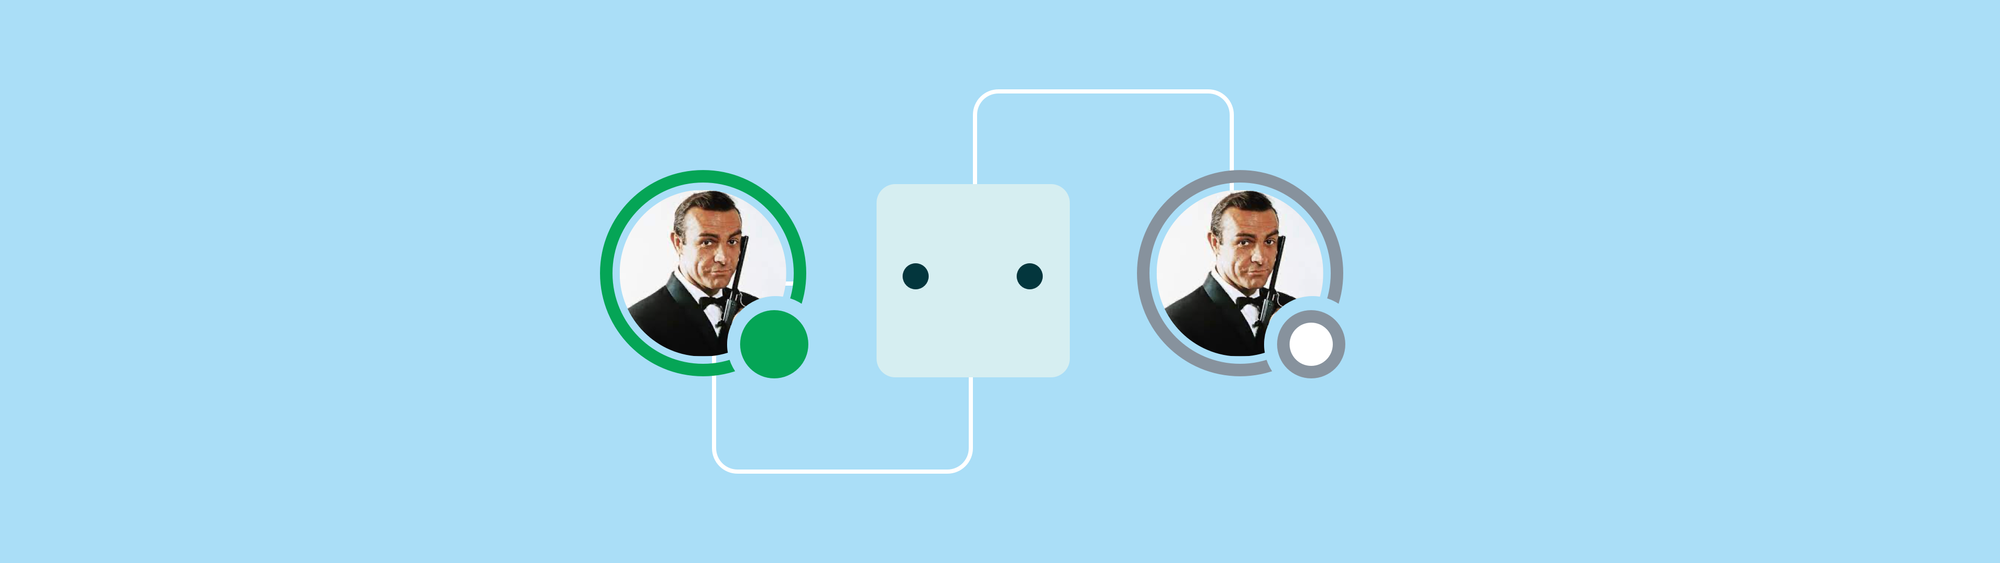 Checking for Agent Availability in Zendesk Messaging